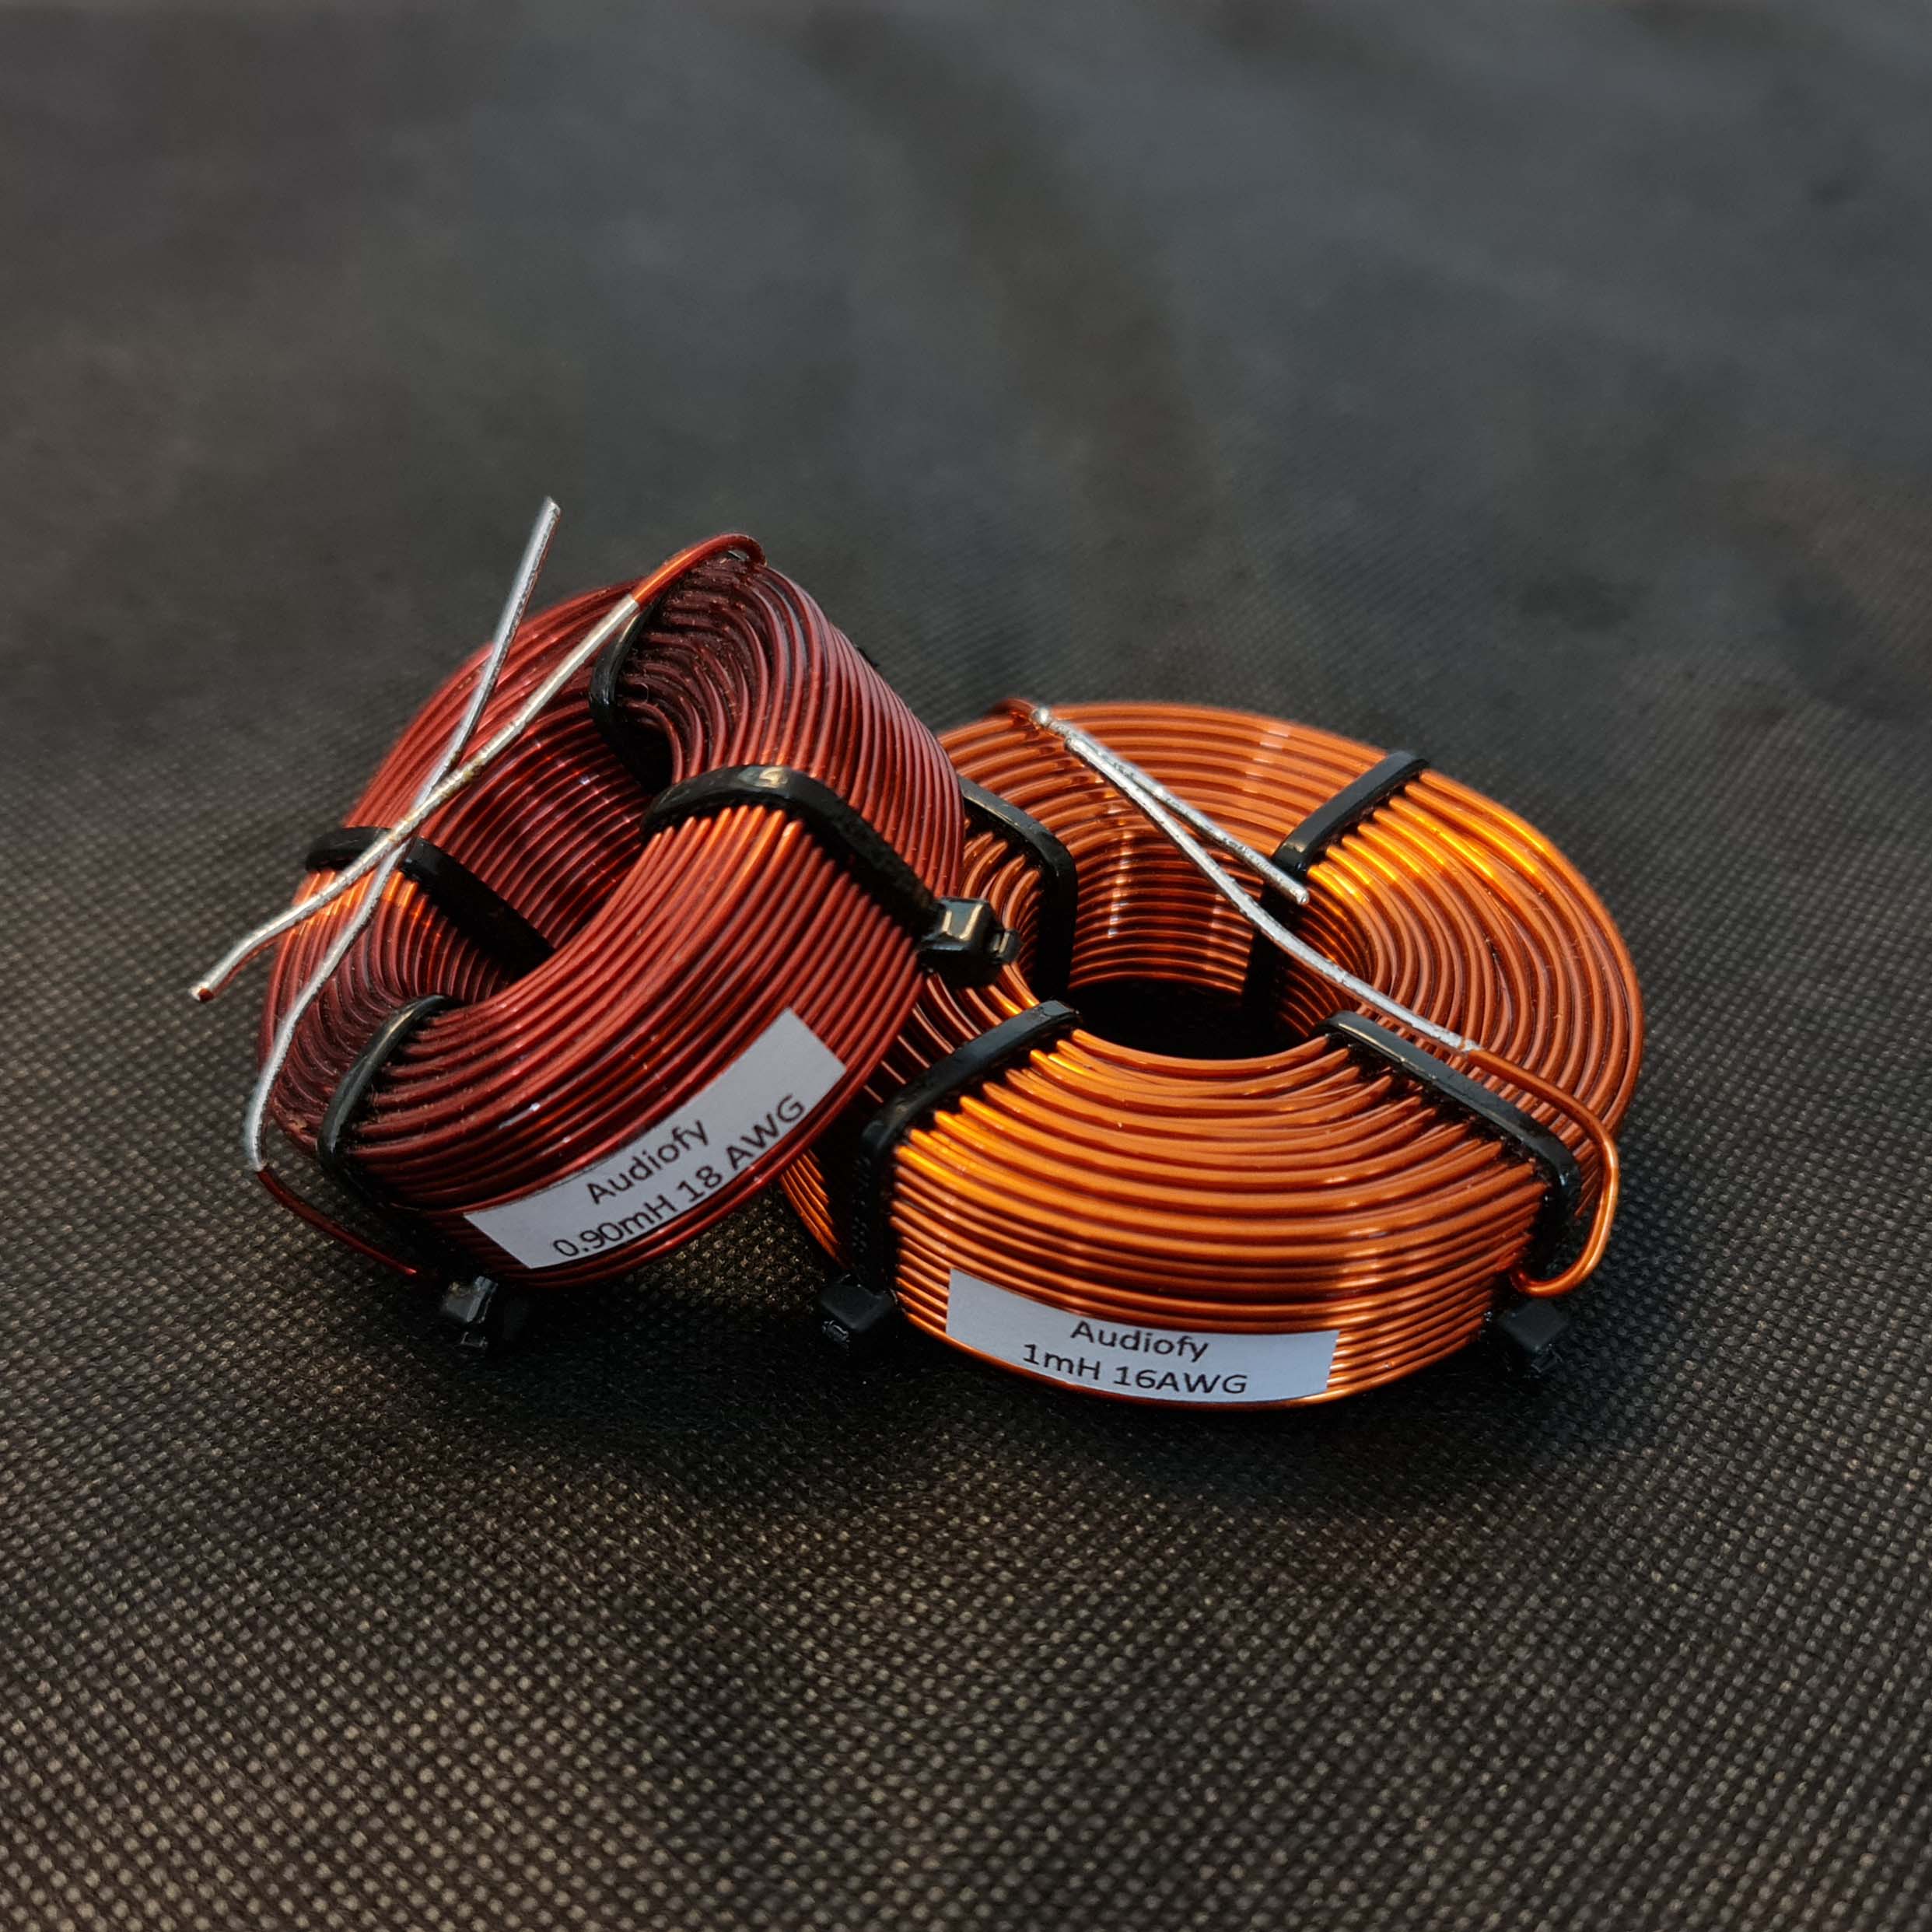 Audiofy 0.90mH 18 AWG Air Core Crossover Inductor